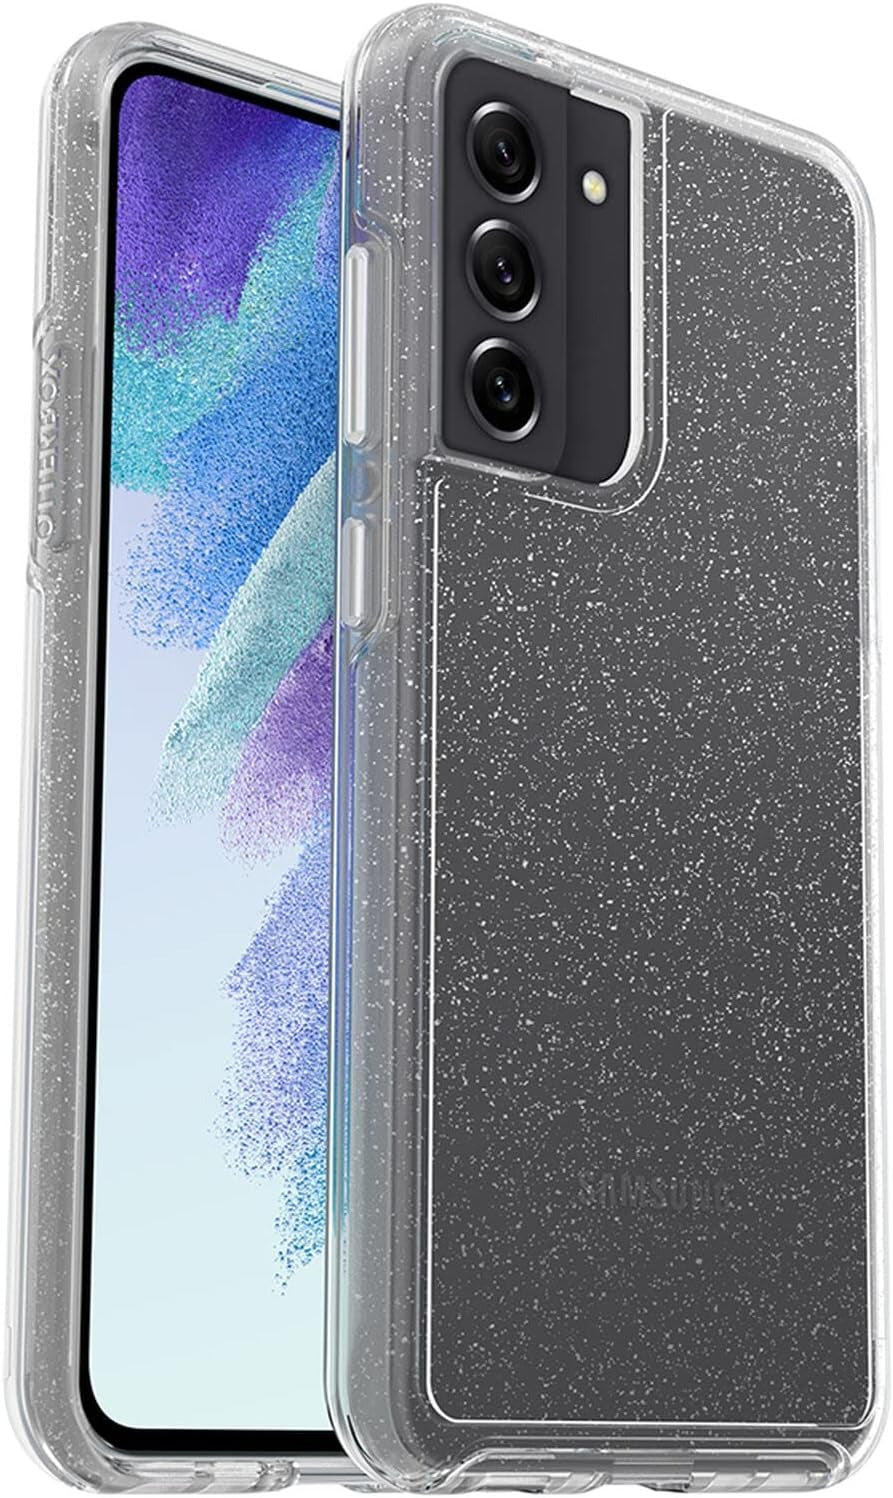 OtterBox SYMMETRY SERIES Case for Samsung Galaxy S21 5G - Stardust (New)